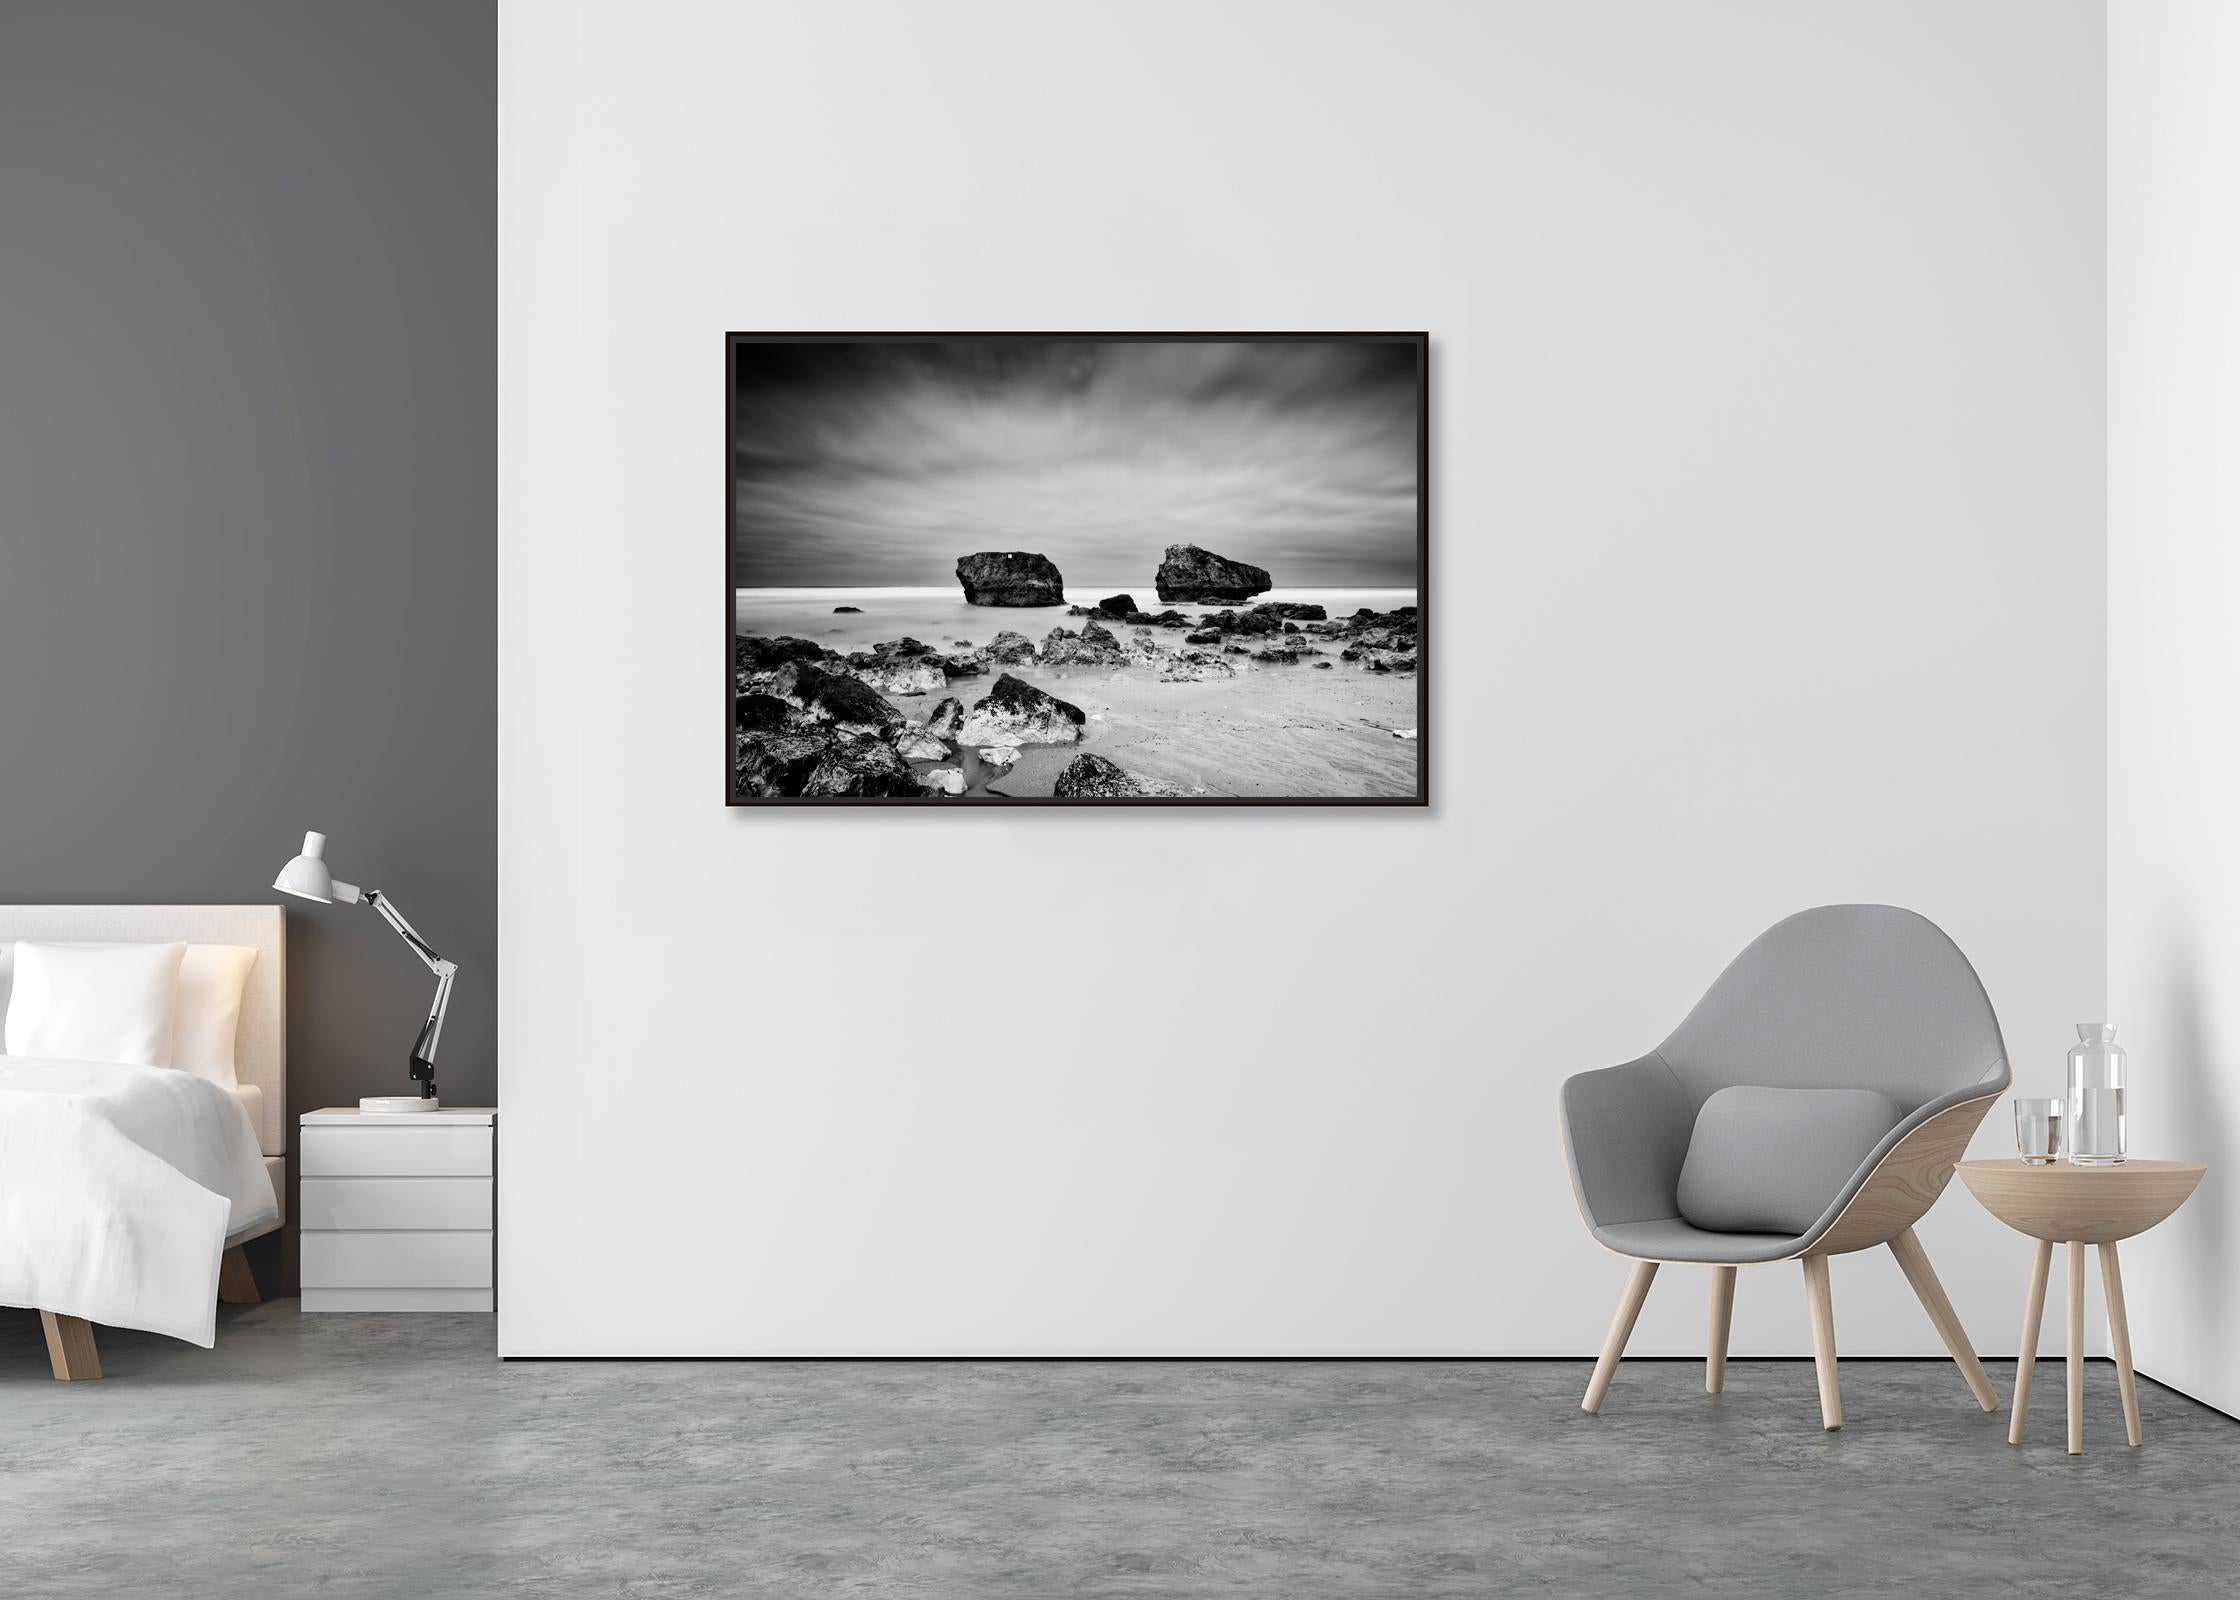 Point de vue Panorama, giant rock, France, black and white landscape photography - Contemporary Photograph by Gerald Berghammer